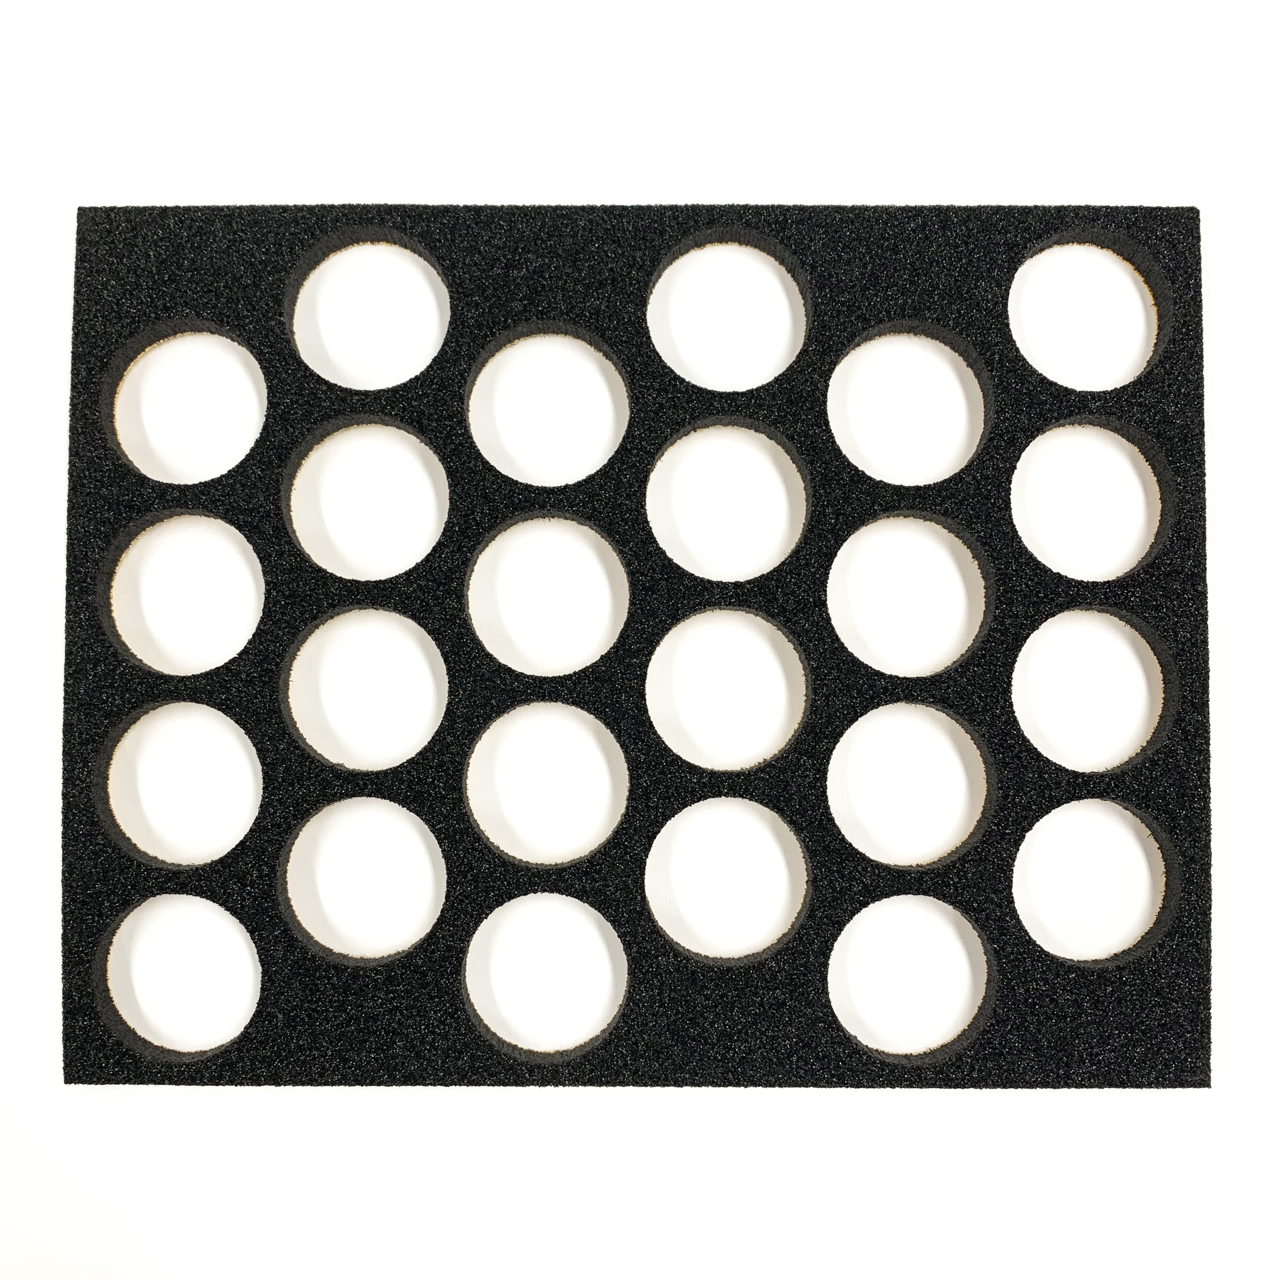 Picture of Superstar - Foam Insert for Plastic Case - 24 Round Slots (16g) (9.65"x12.2")